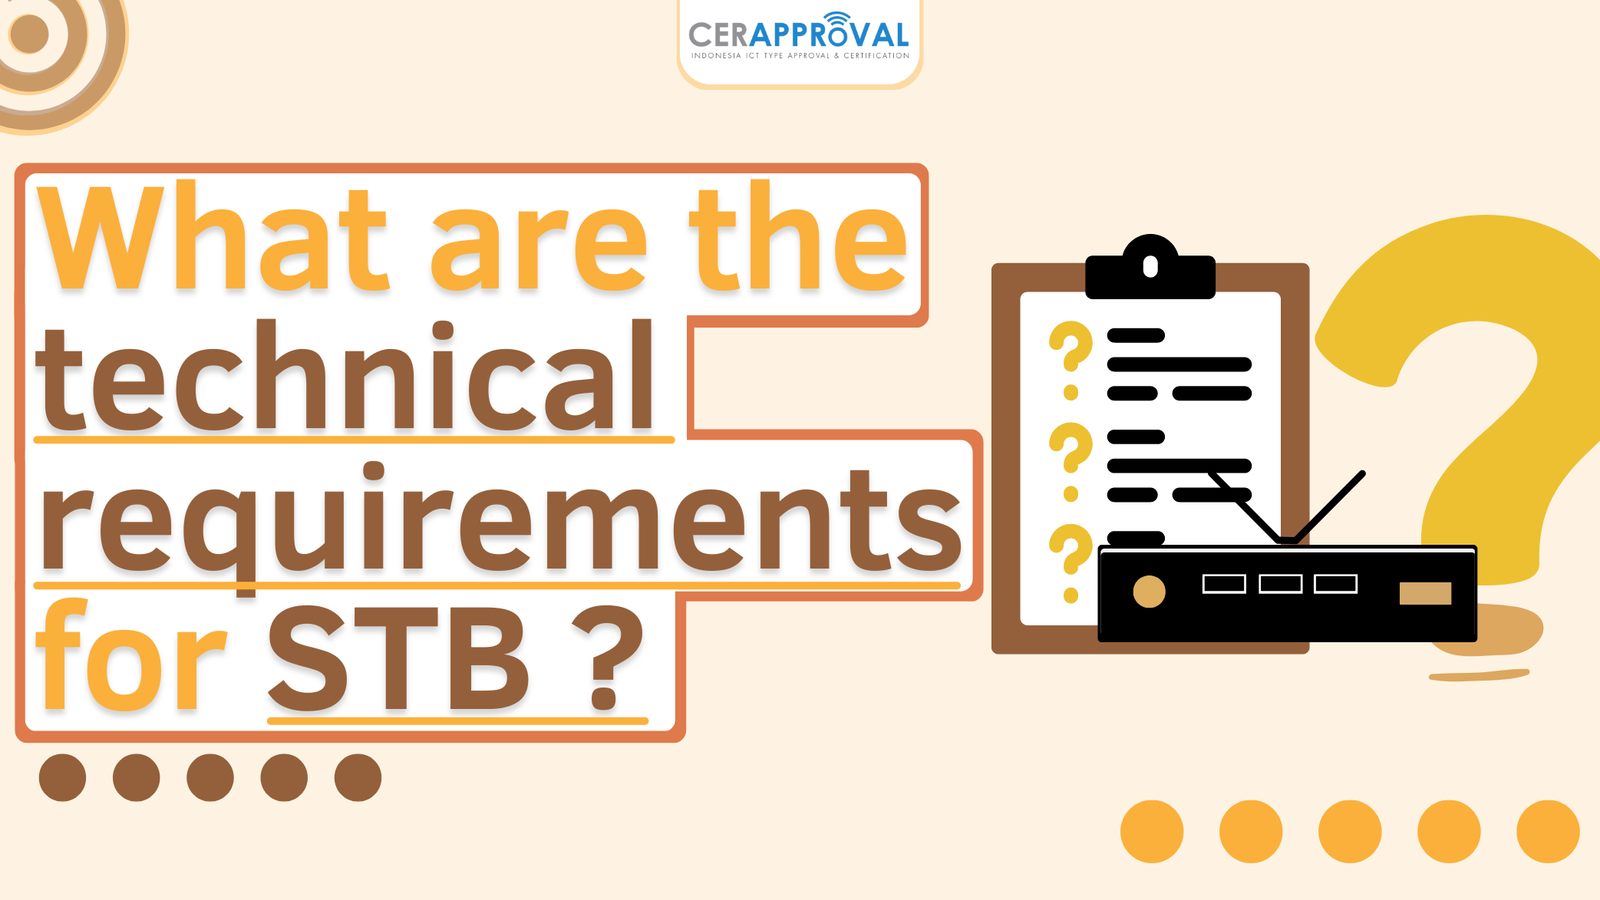 What are the technical requirements for STB?